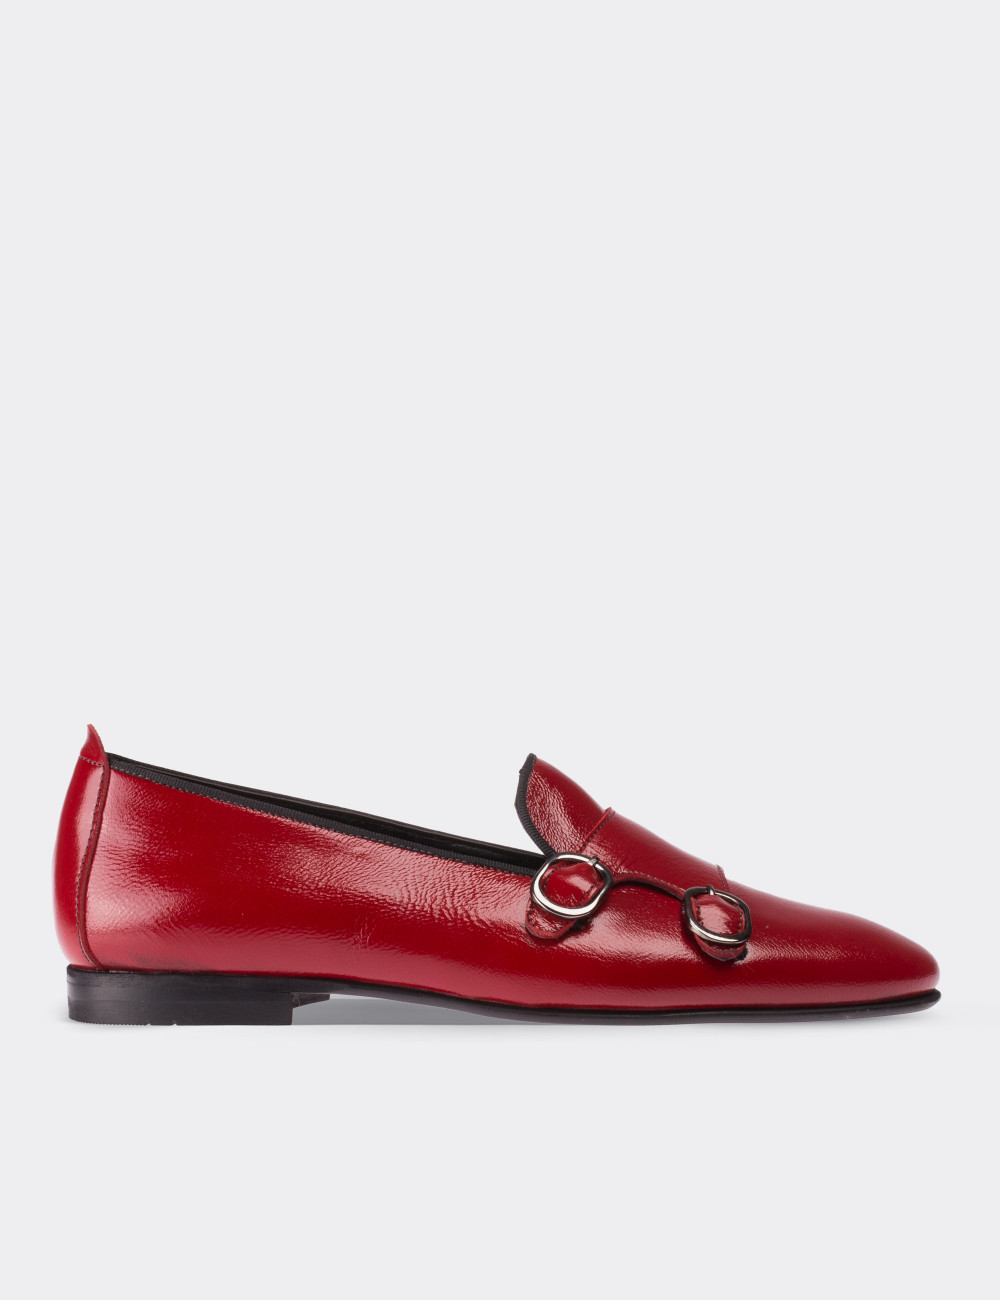 Red Patent Leather Loafers - Deery